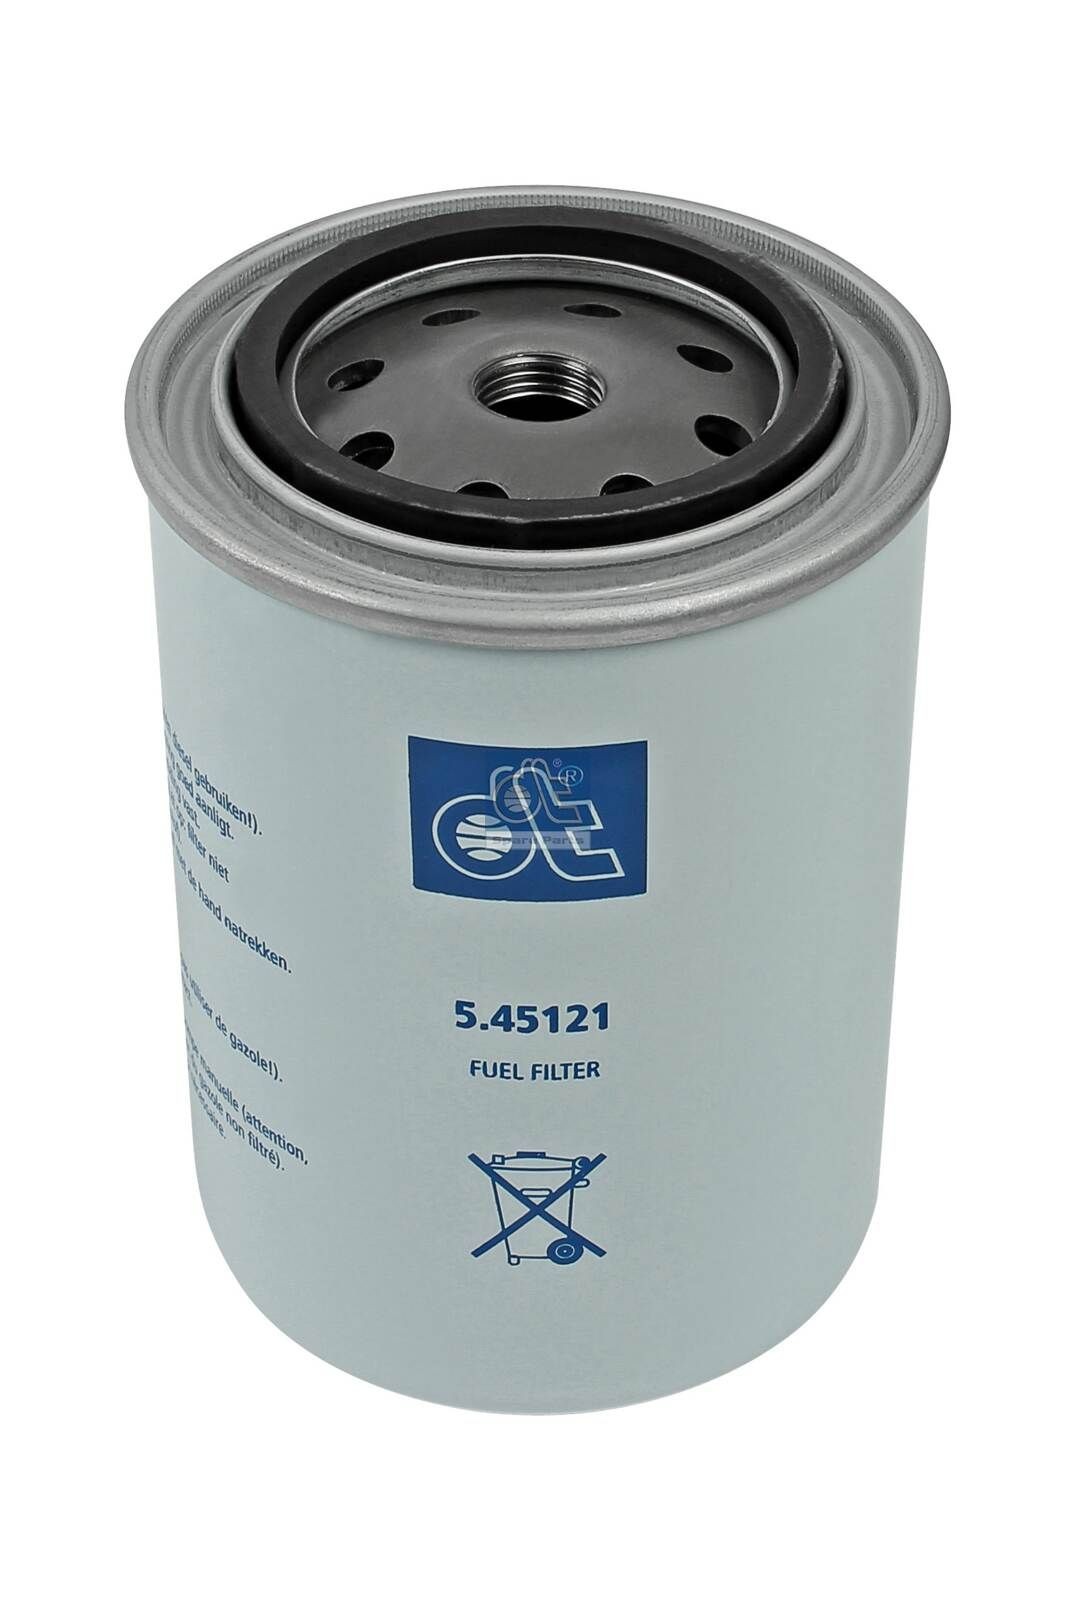 WDK 940/5 DT Spare Parts 5.45121 Fuel filter 1470 827